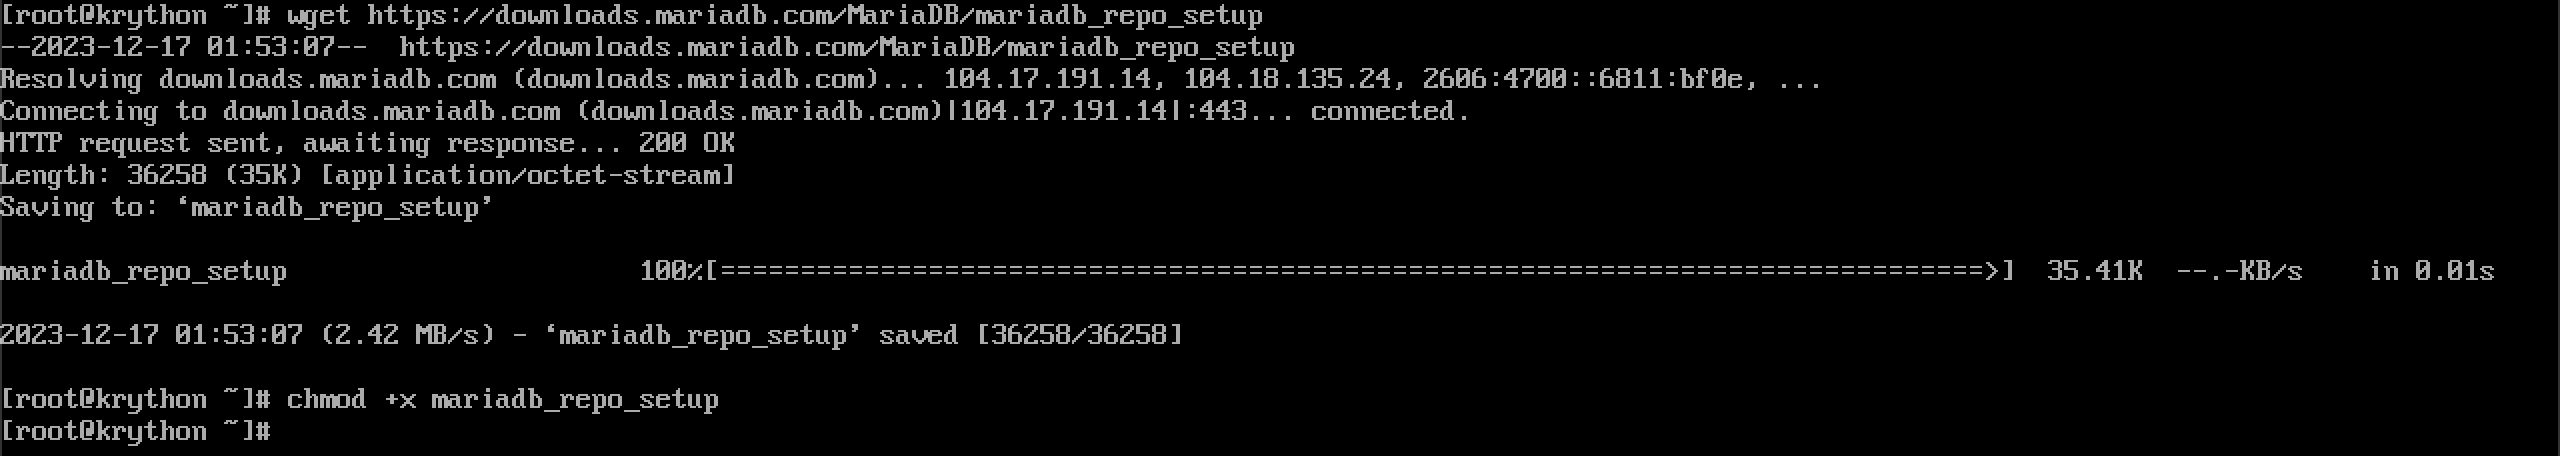 Installing and Configuring MariaDB on AlmaLinux